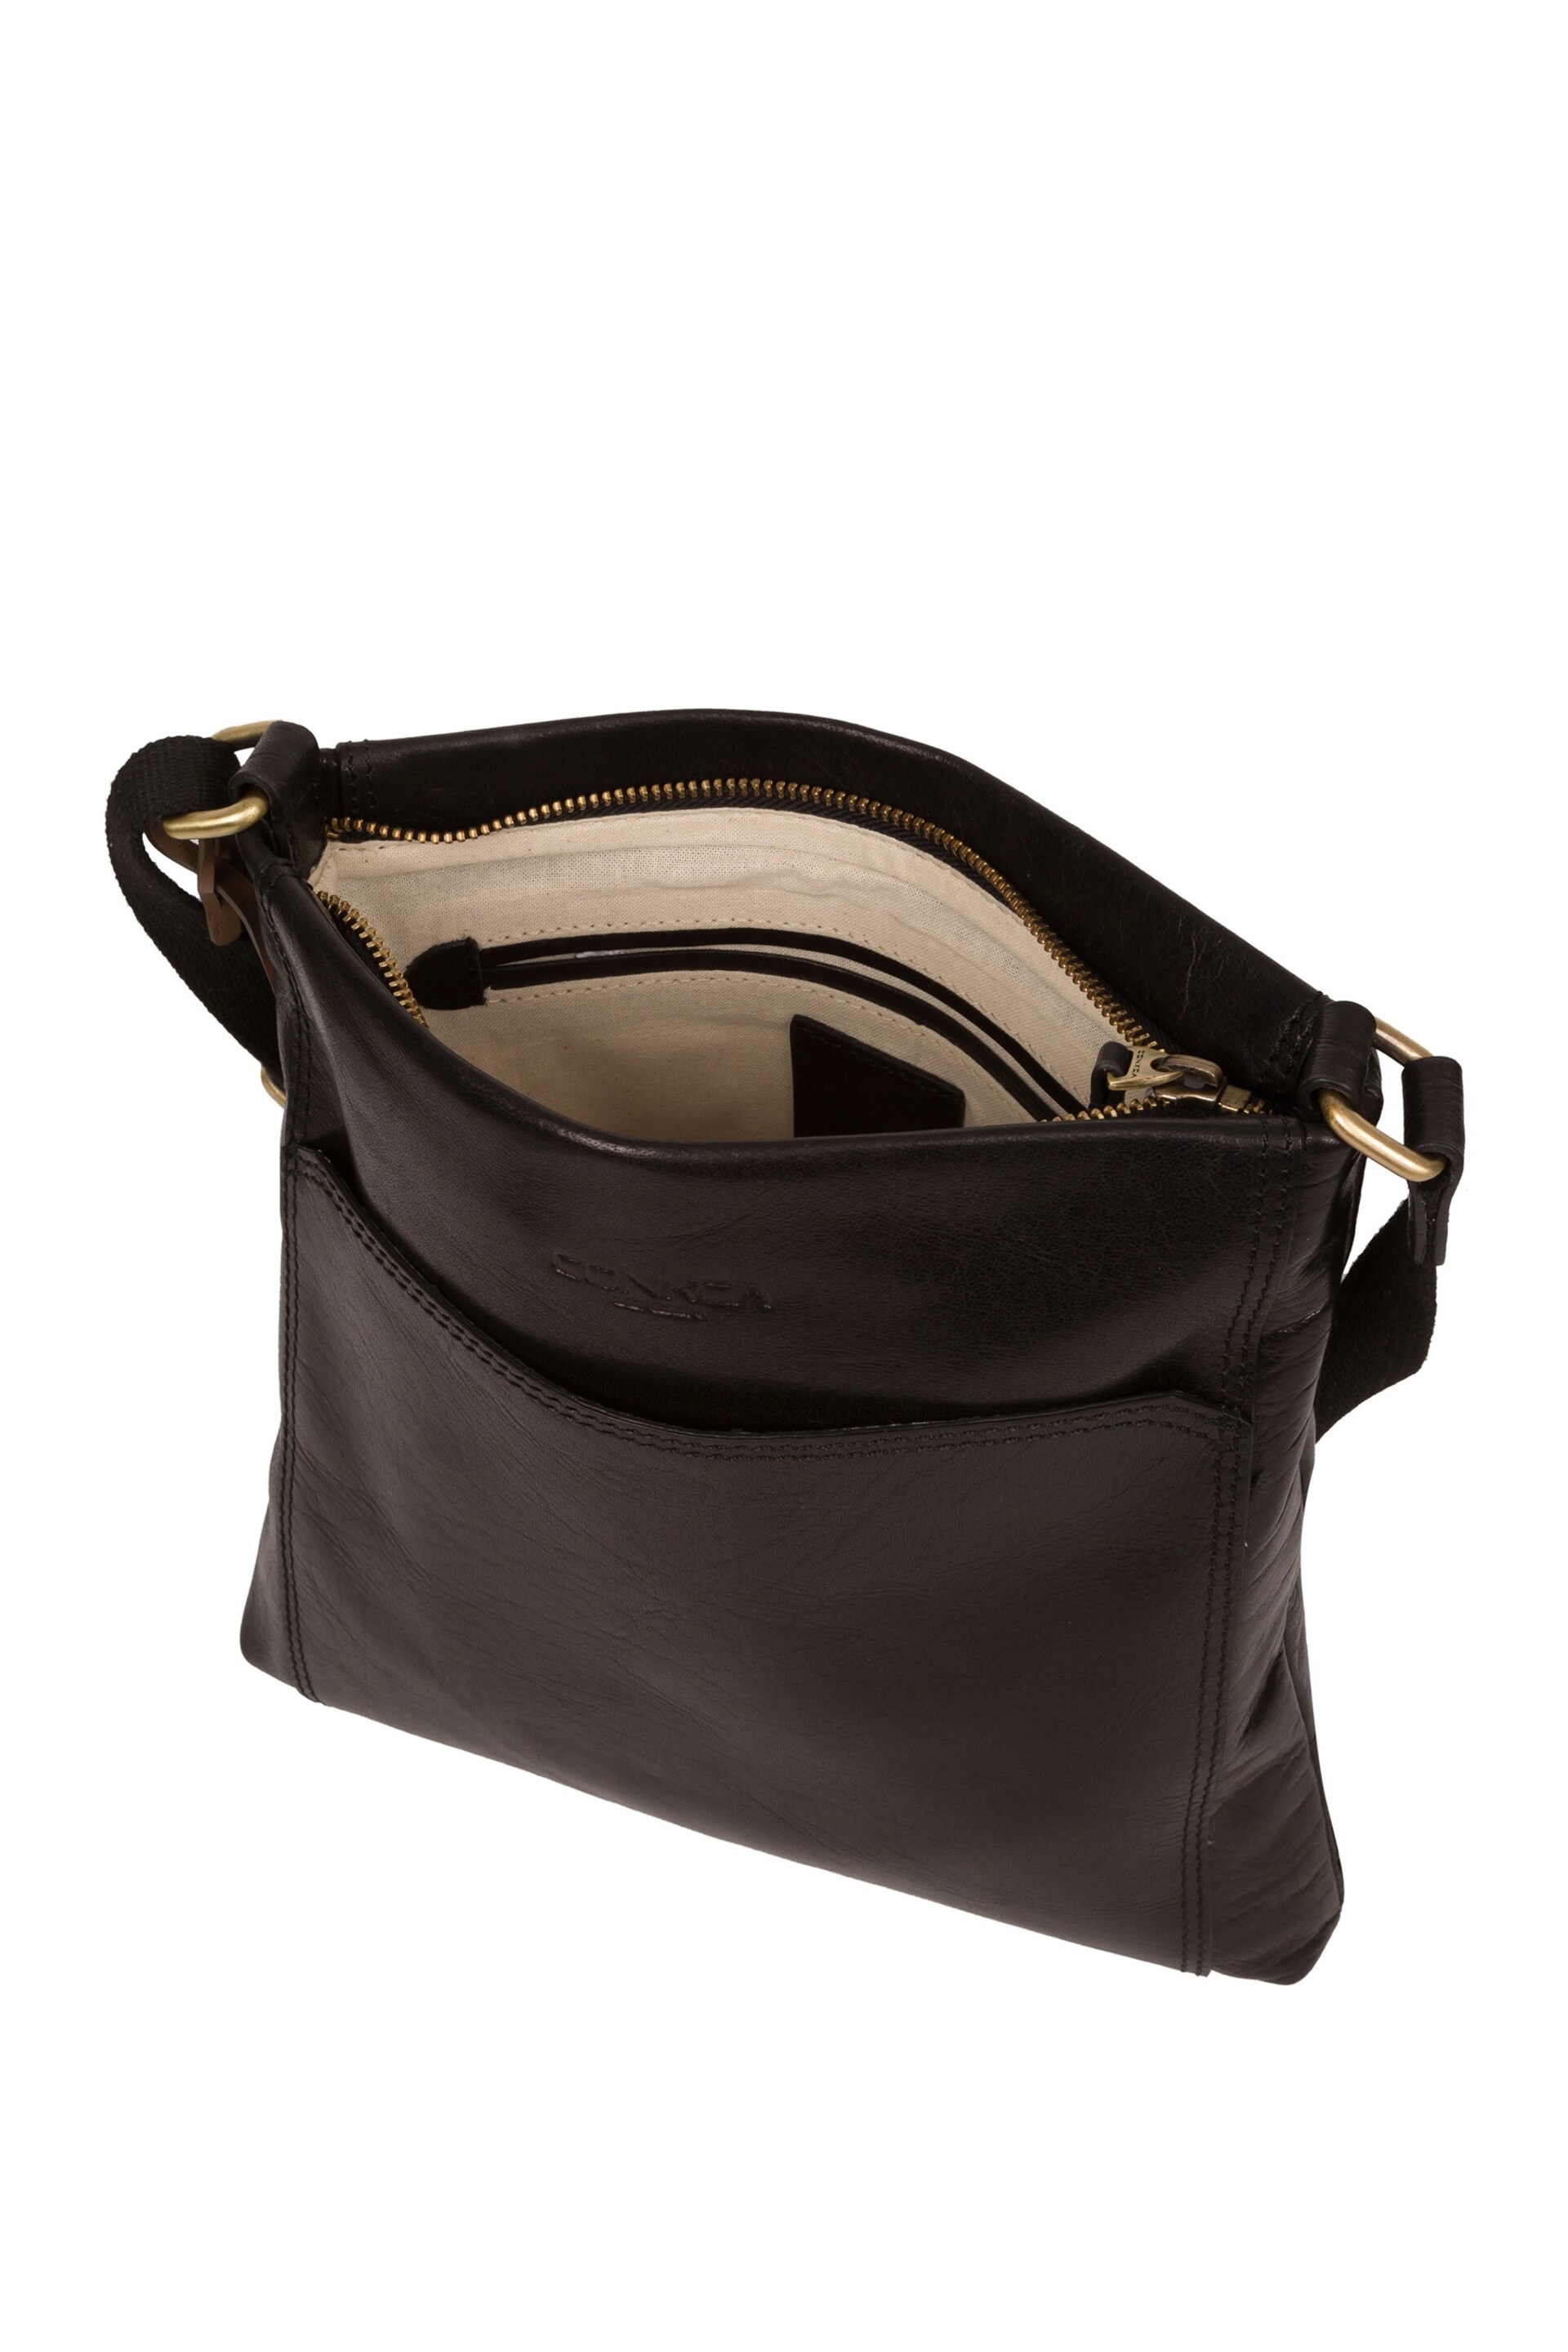 Conkca Dink Leather Cross-Body Bag - Image 4 of 5